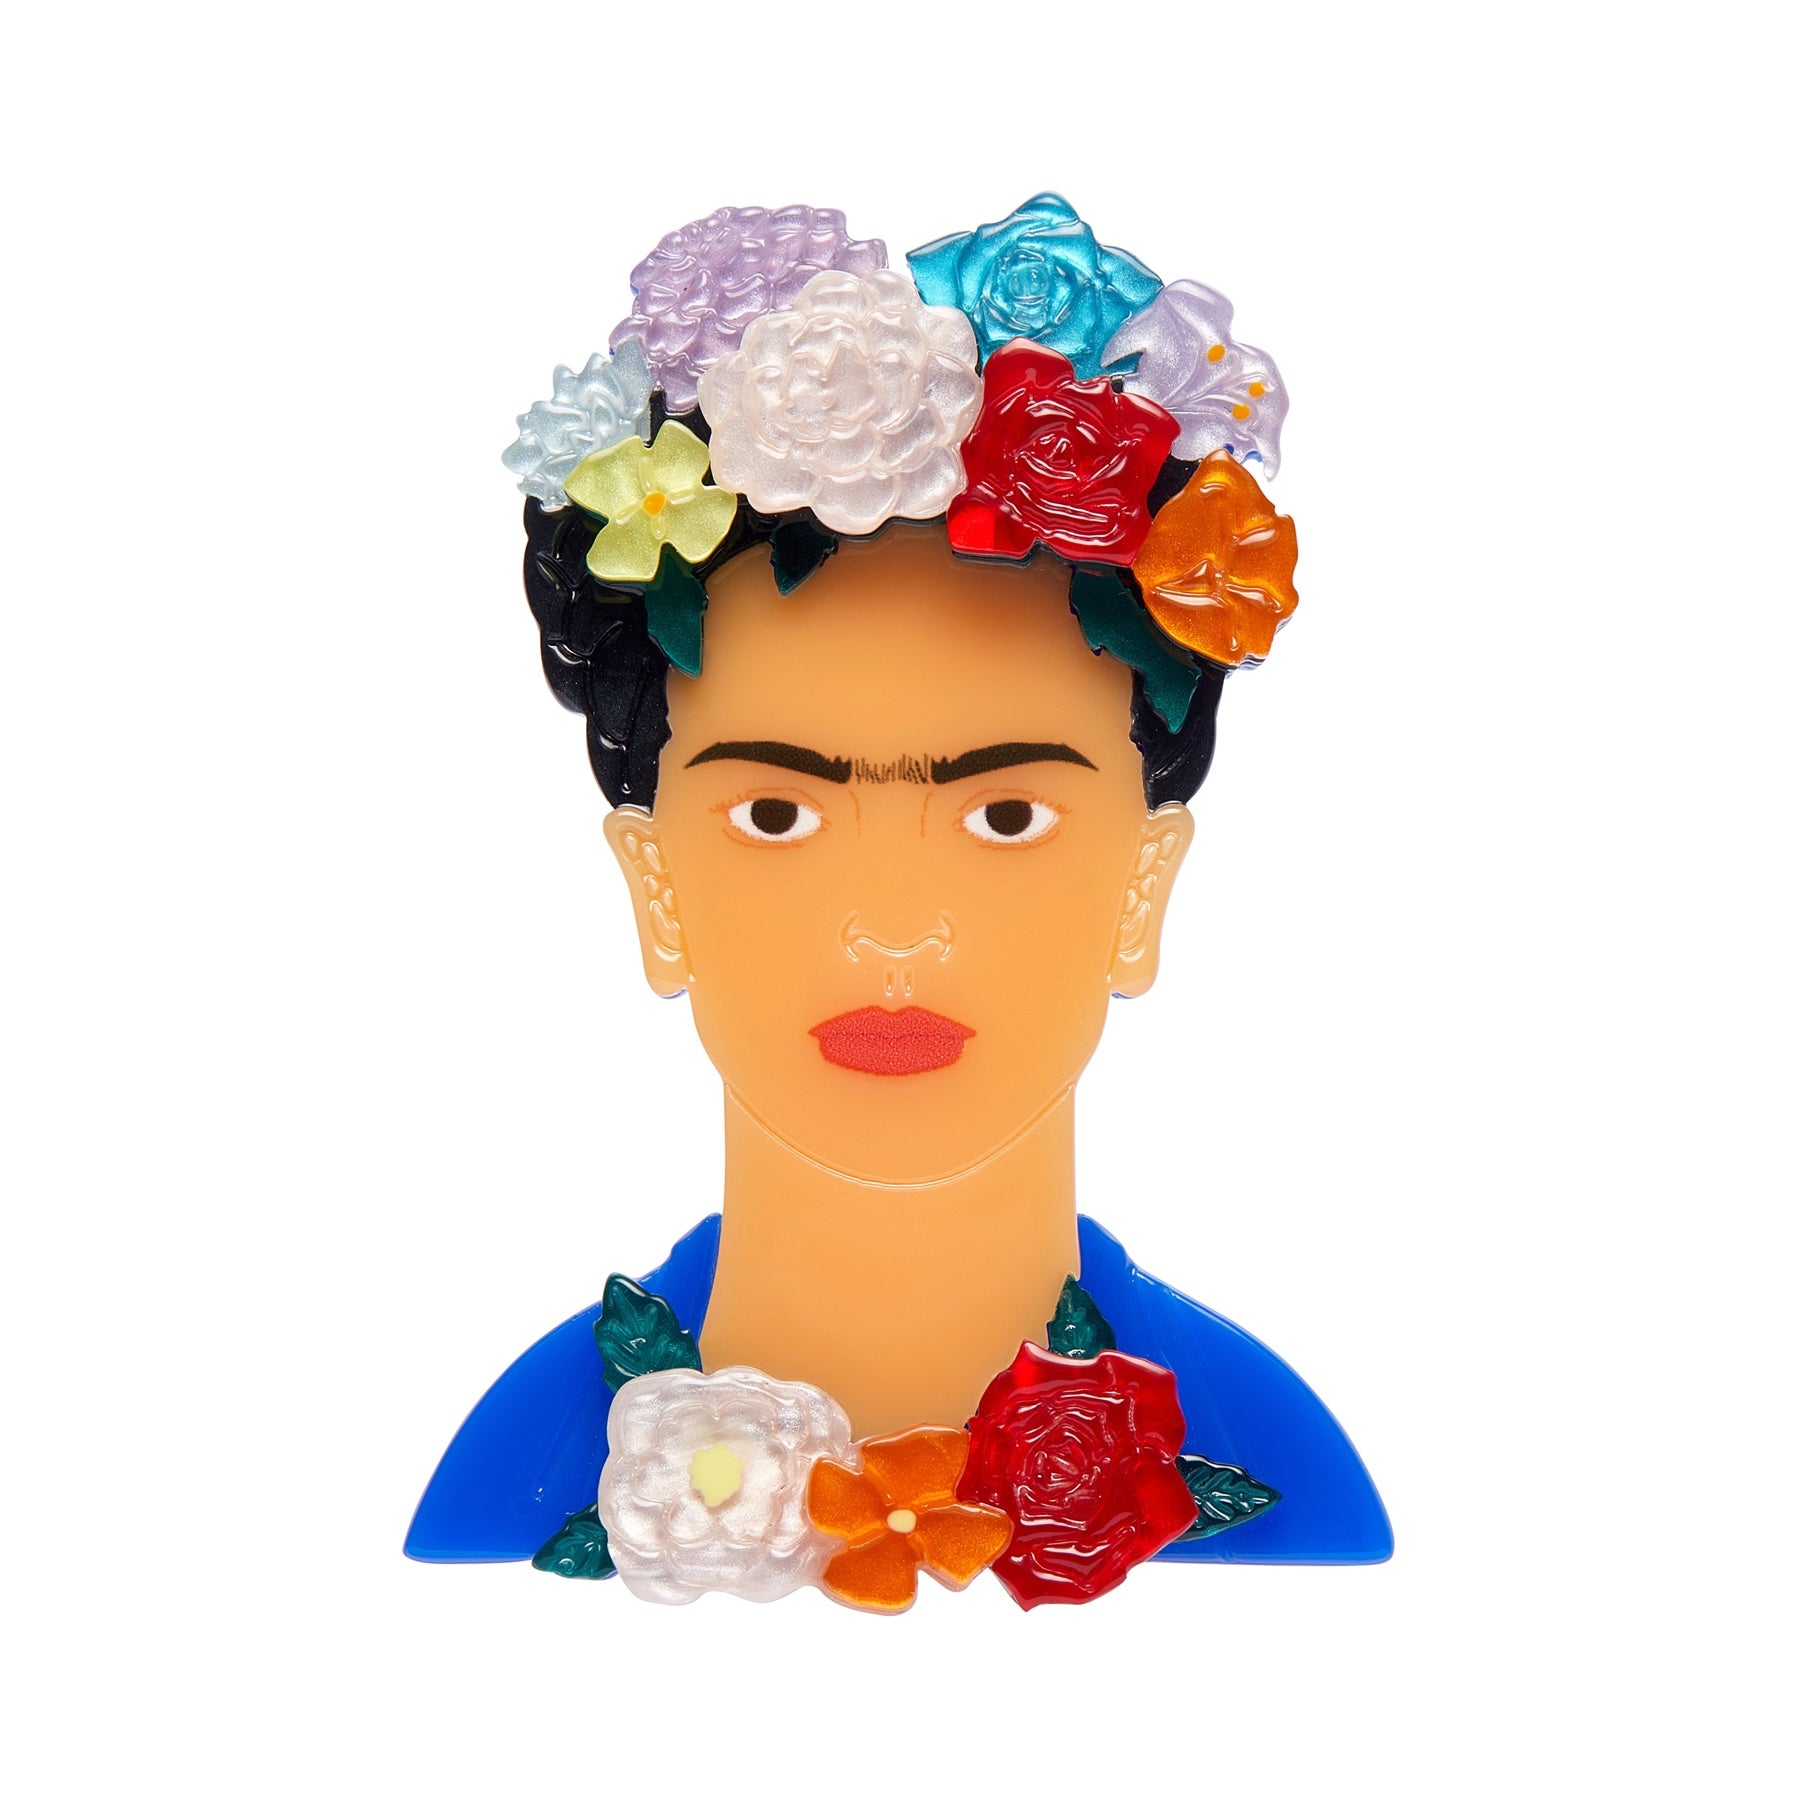 Erstwilder x Frida Kahlo Collection “My Own Muse Frida” layered resin portrait brooch showing Frida with multicolored flowers in her hair and at her throat, and wearing blue